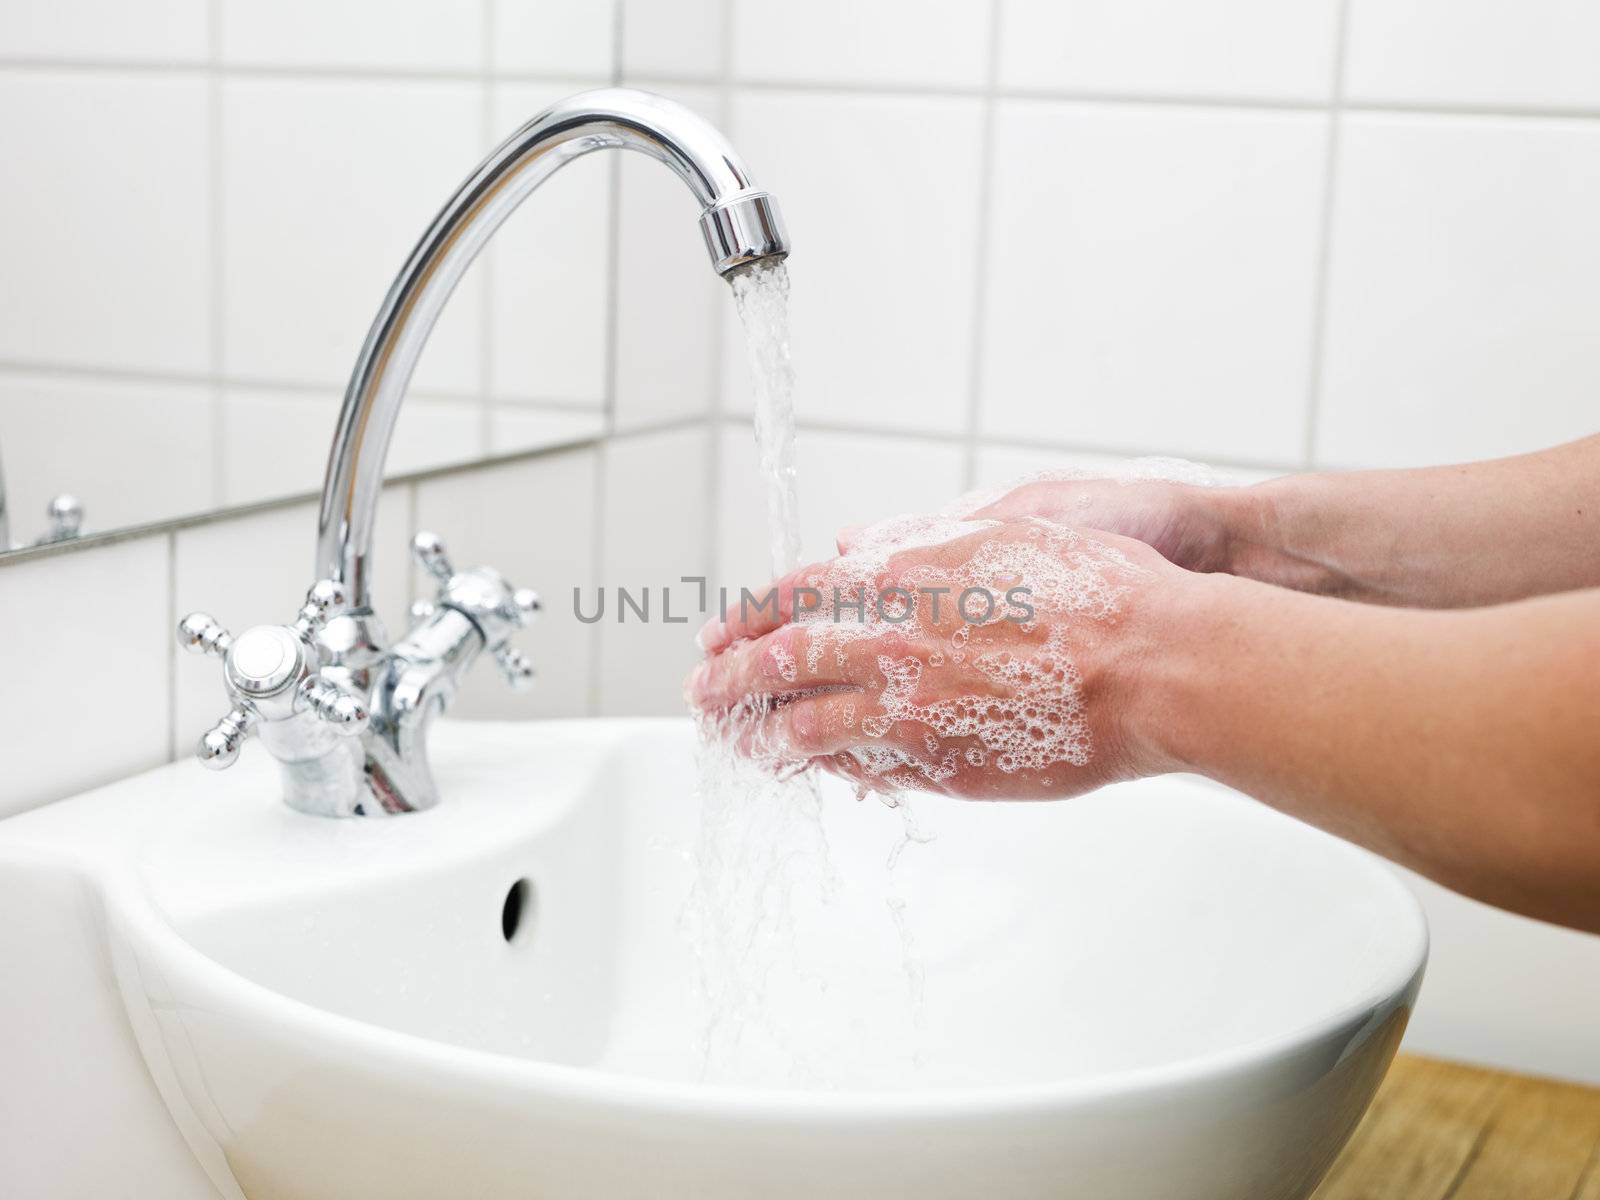 Washing hands at the bathroom